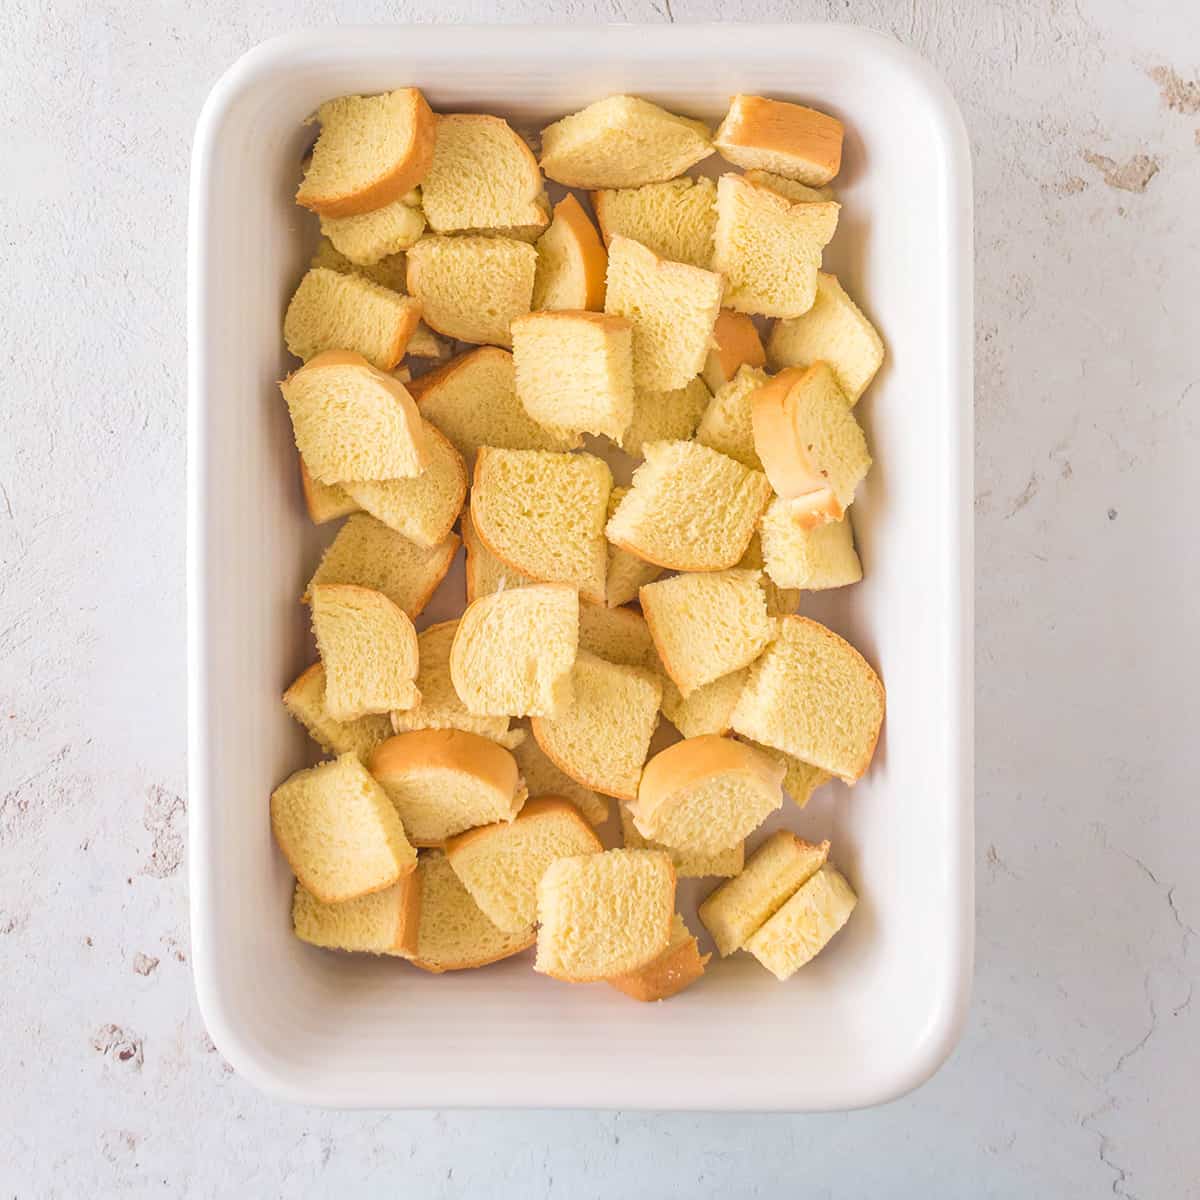 Cubed brioche in a buttered baking dish.